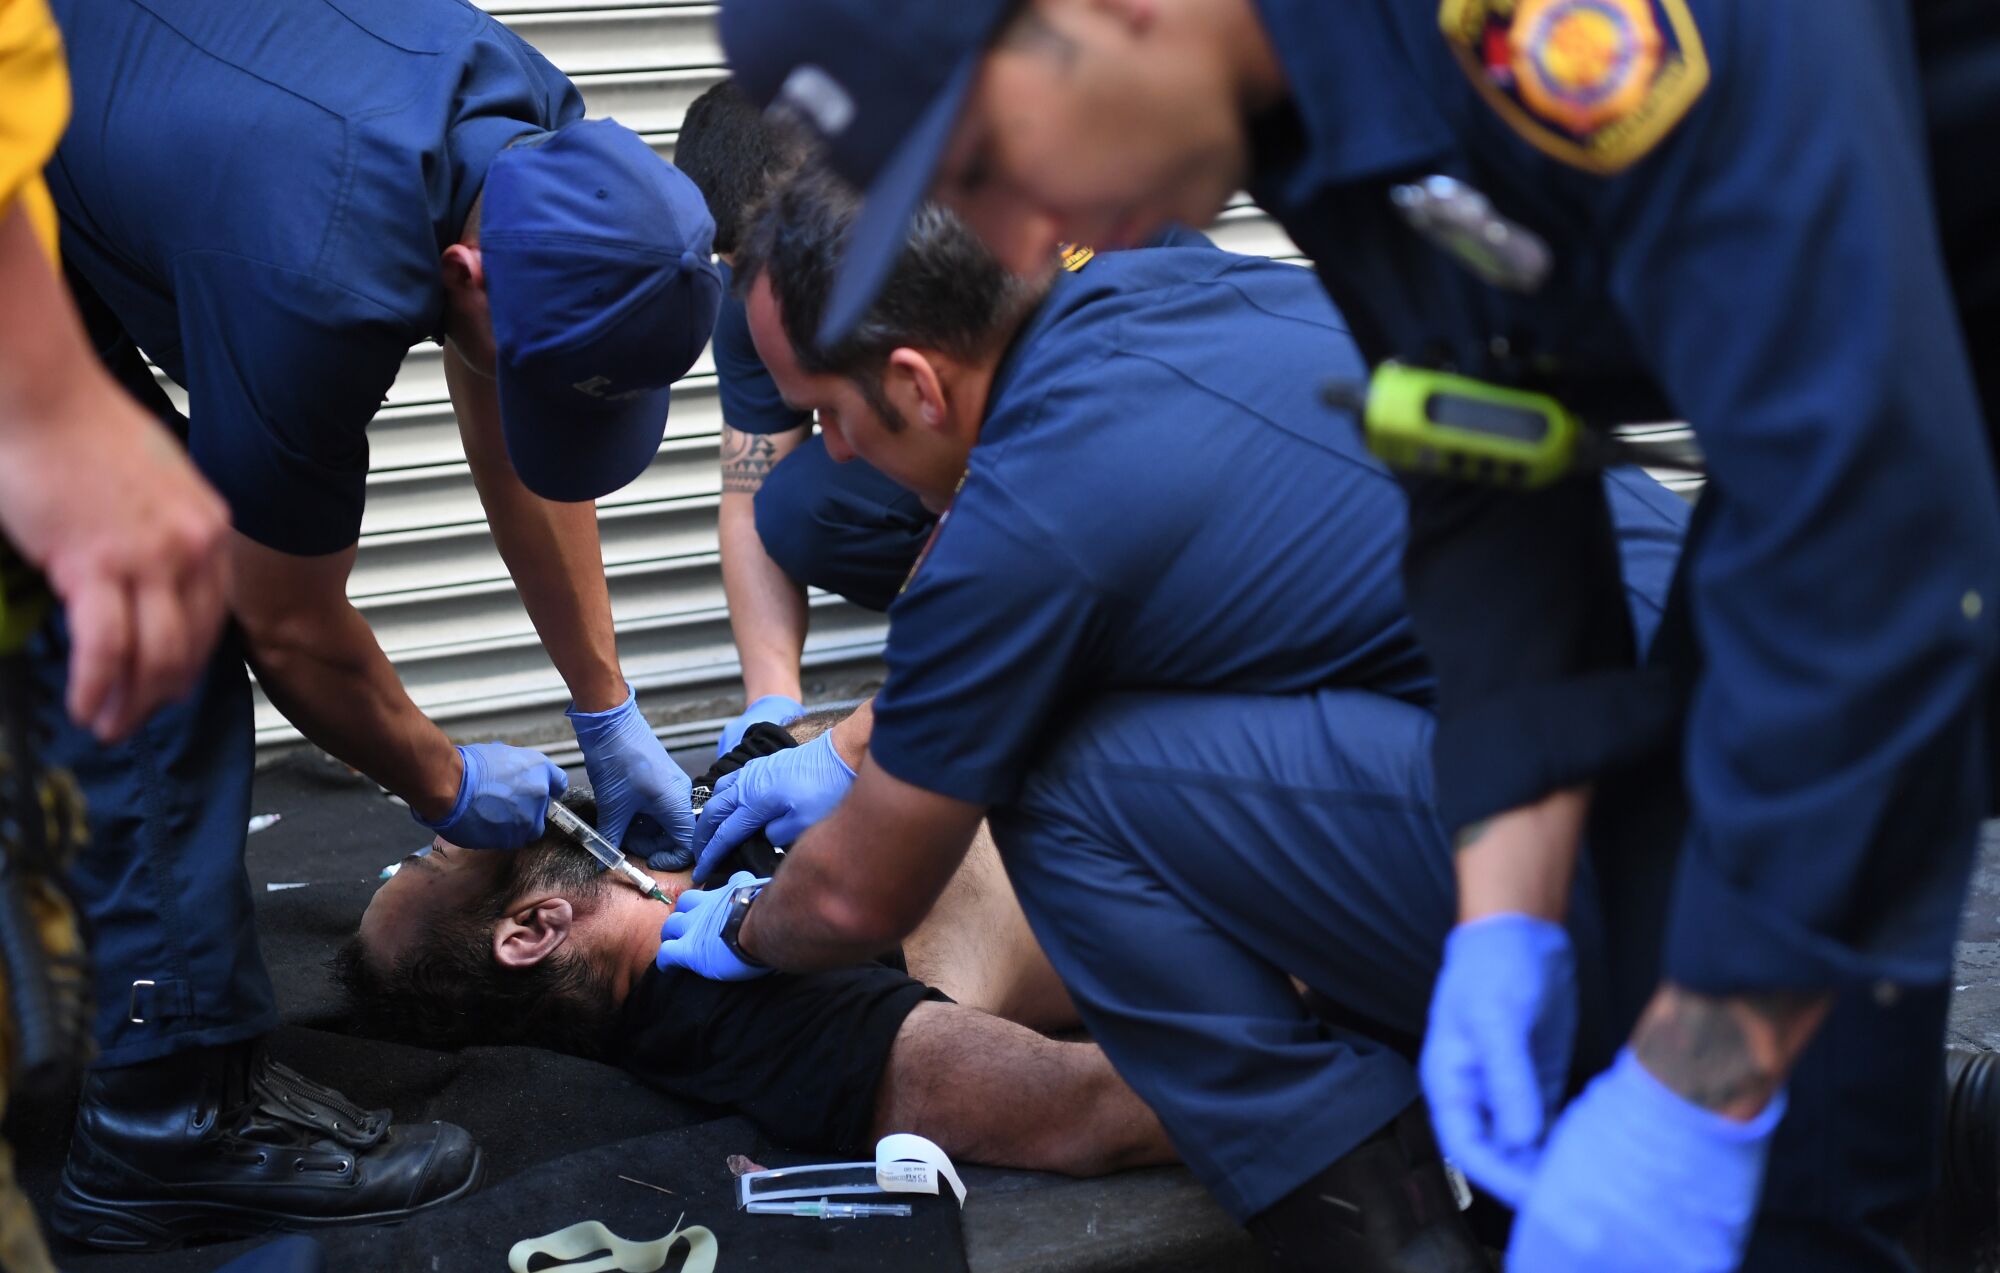 Los Angeles firefighters inject naloxone into the neck of an overdose patient